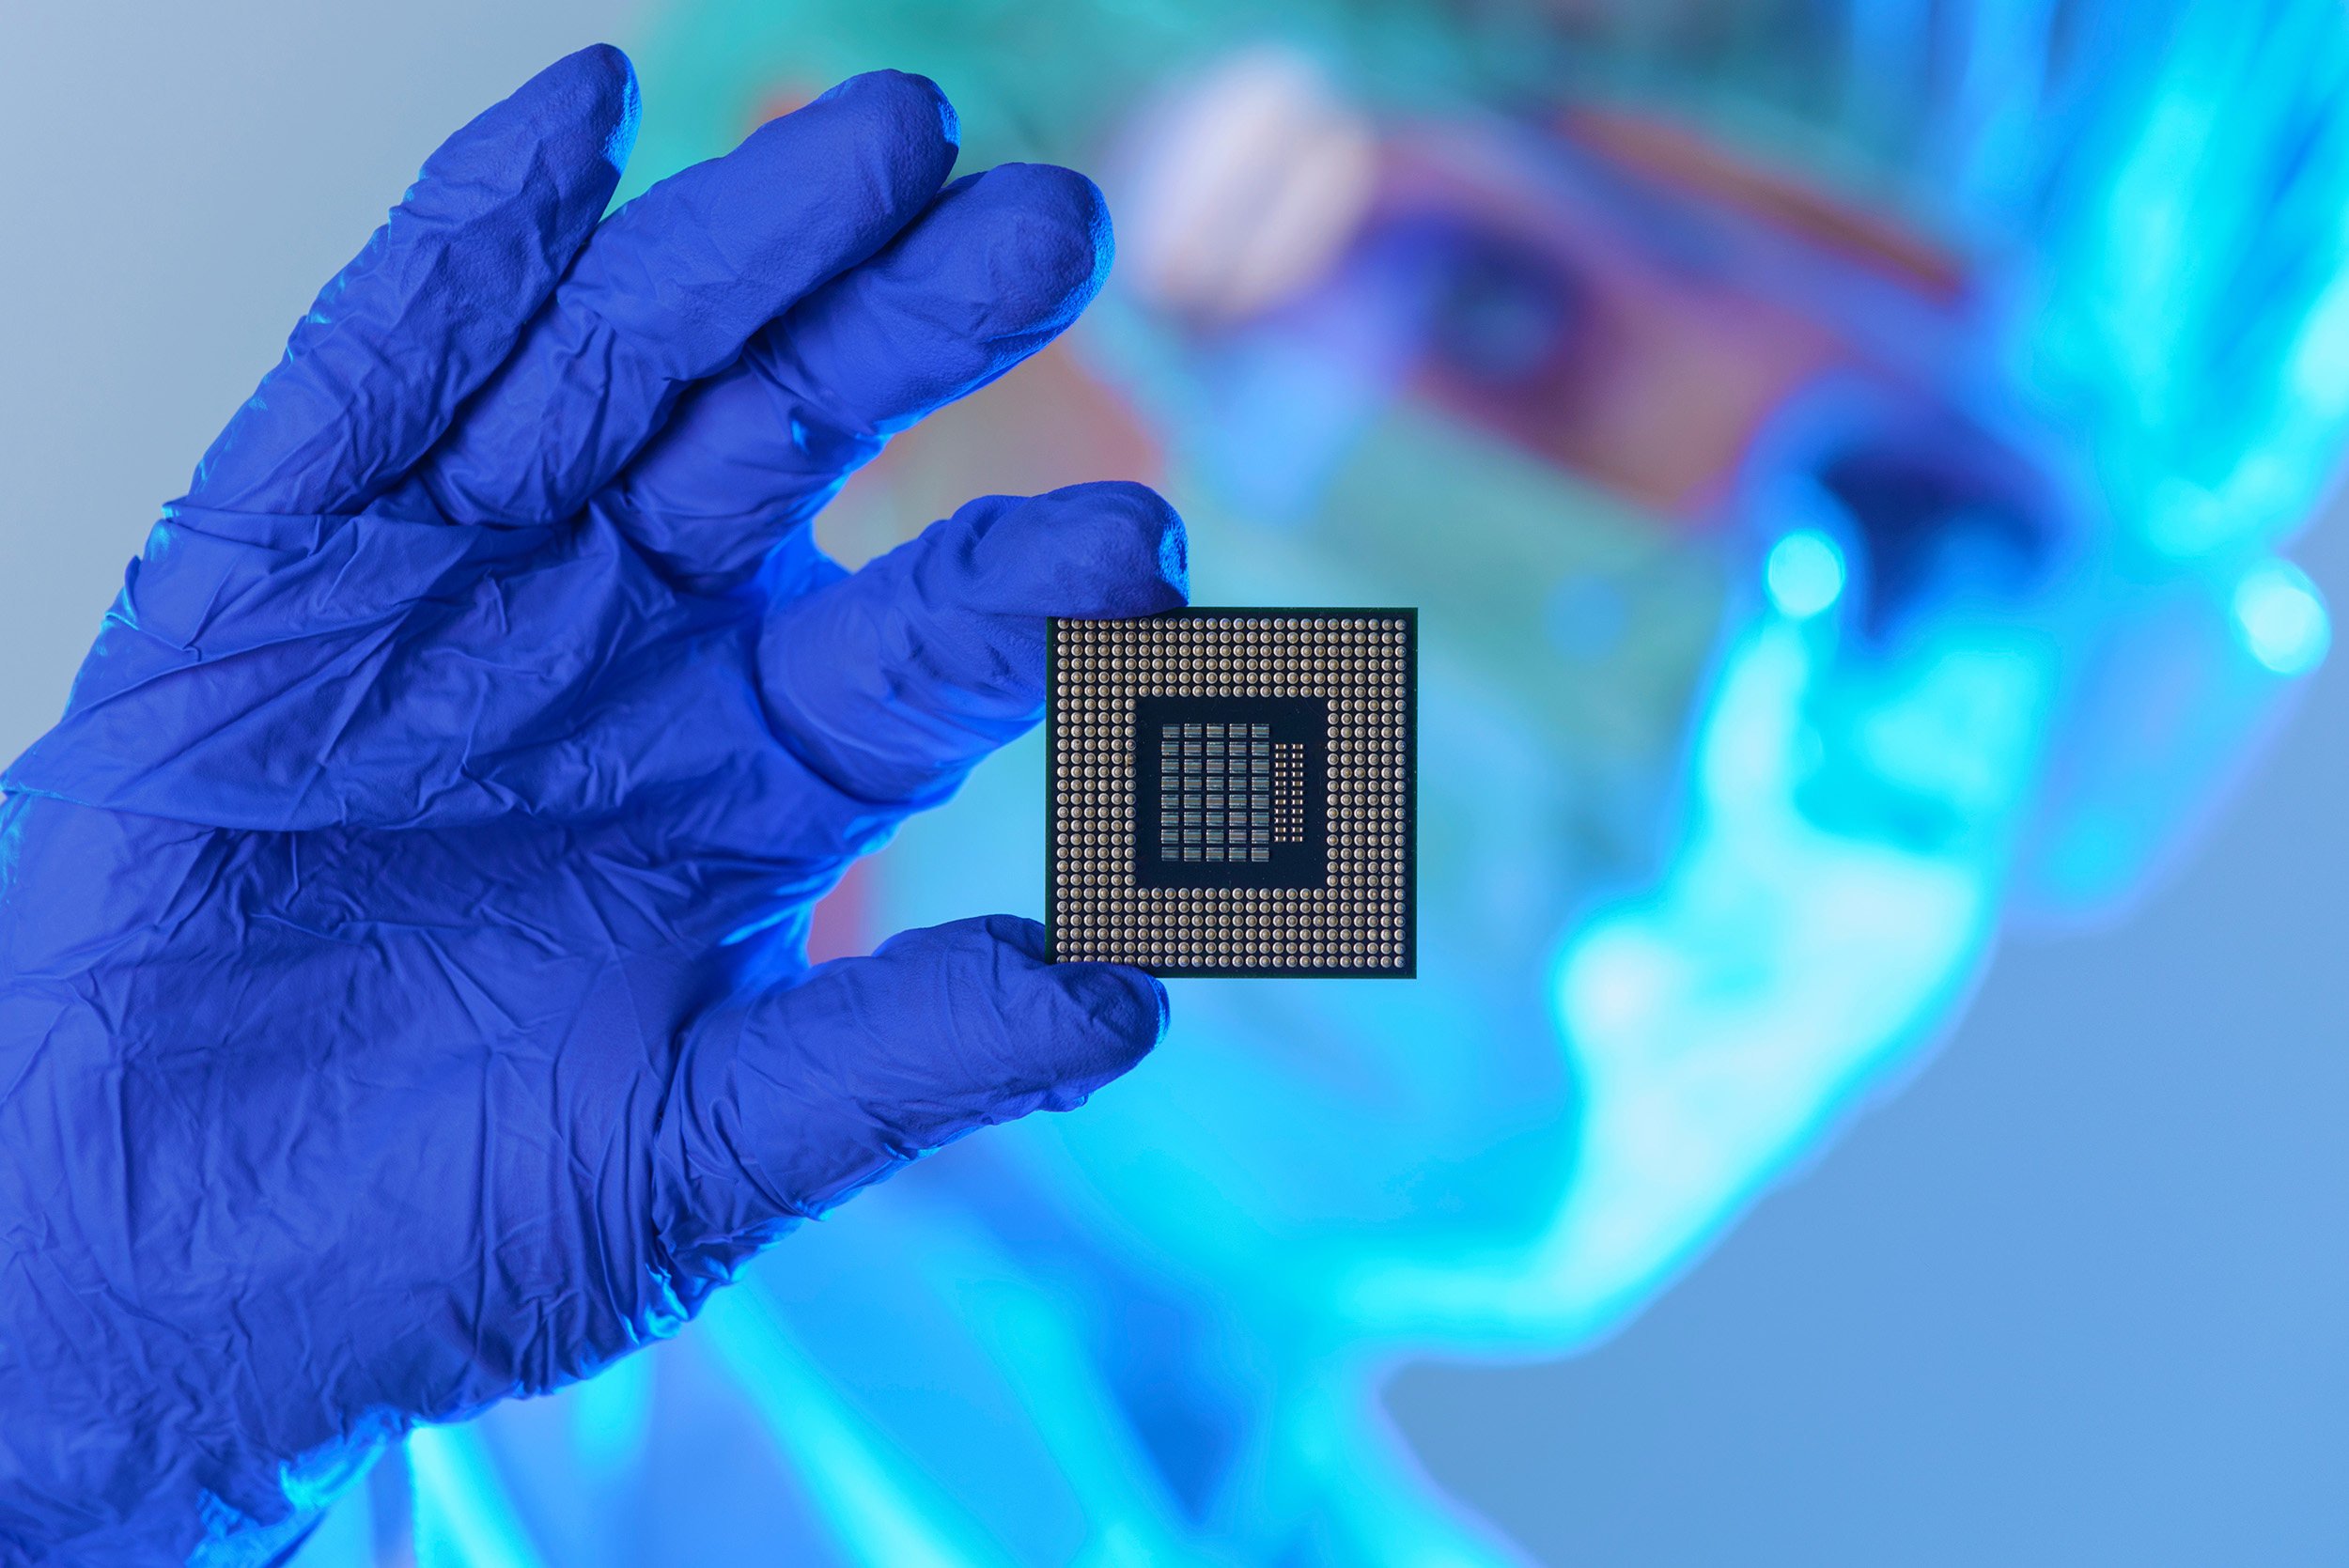 Chinese scientists have revealed two groundbreaking AI chips at a leading conference that are highly energy efficient. Photo: Shutterstock